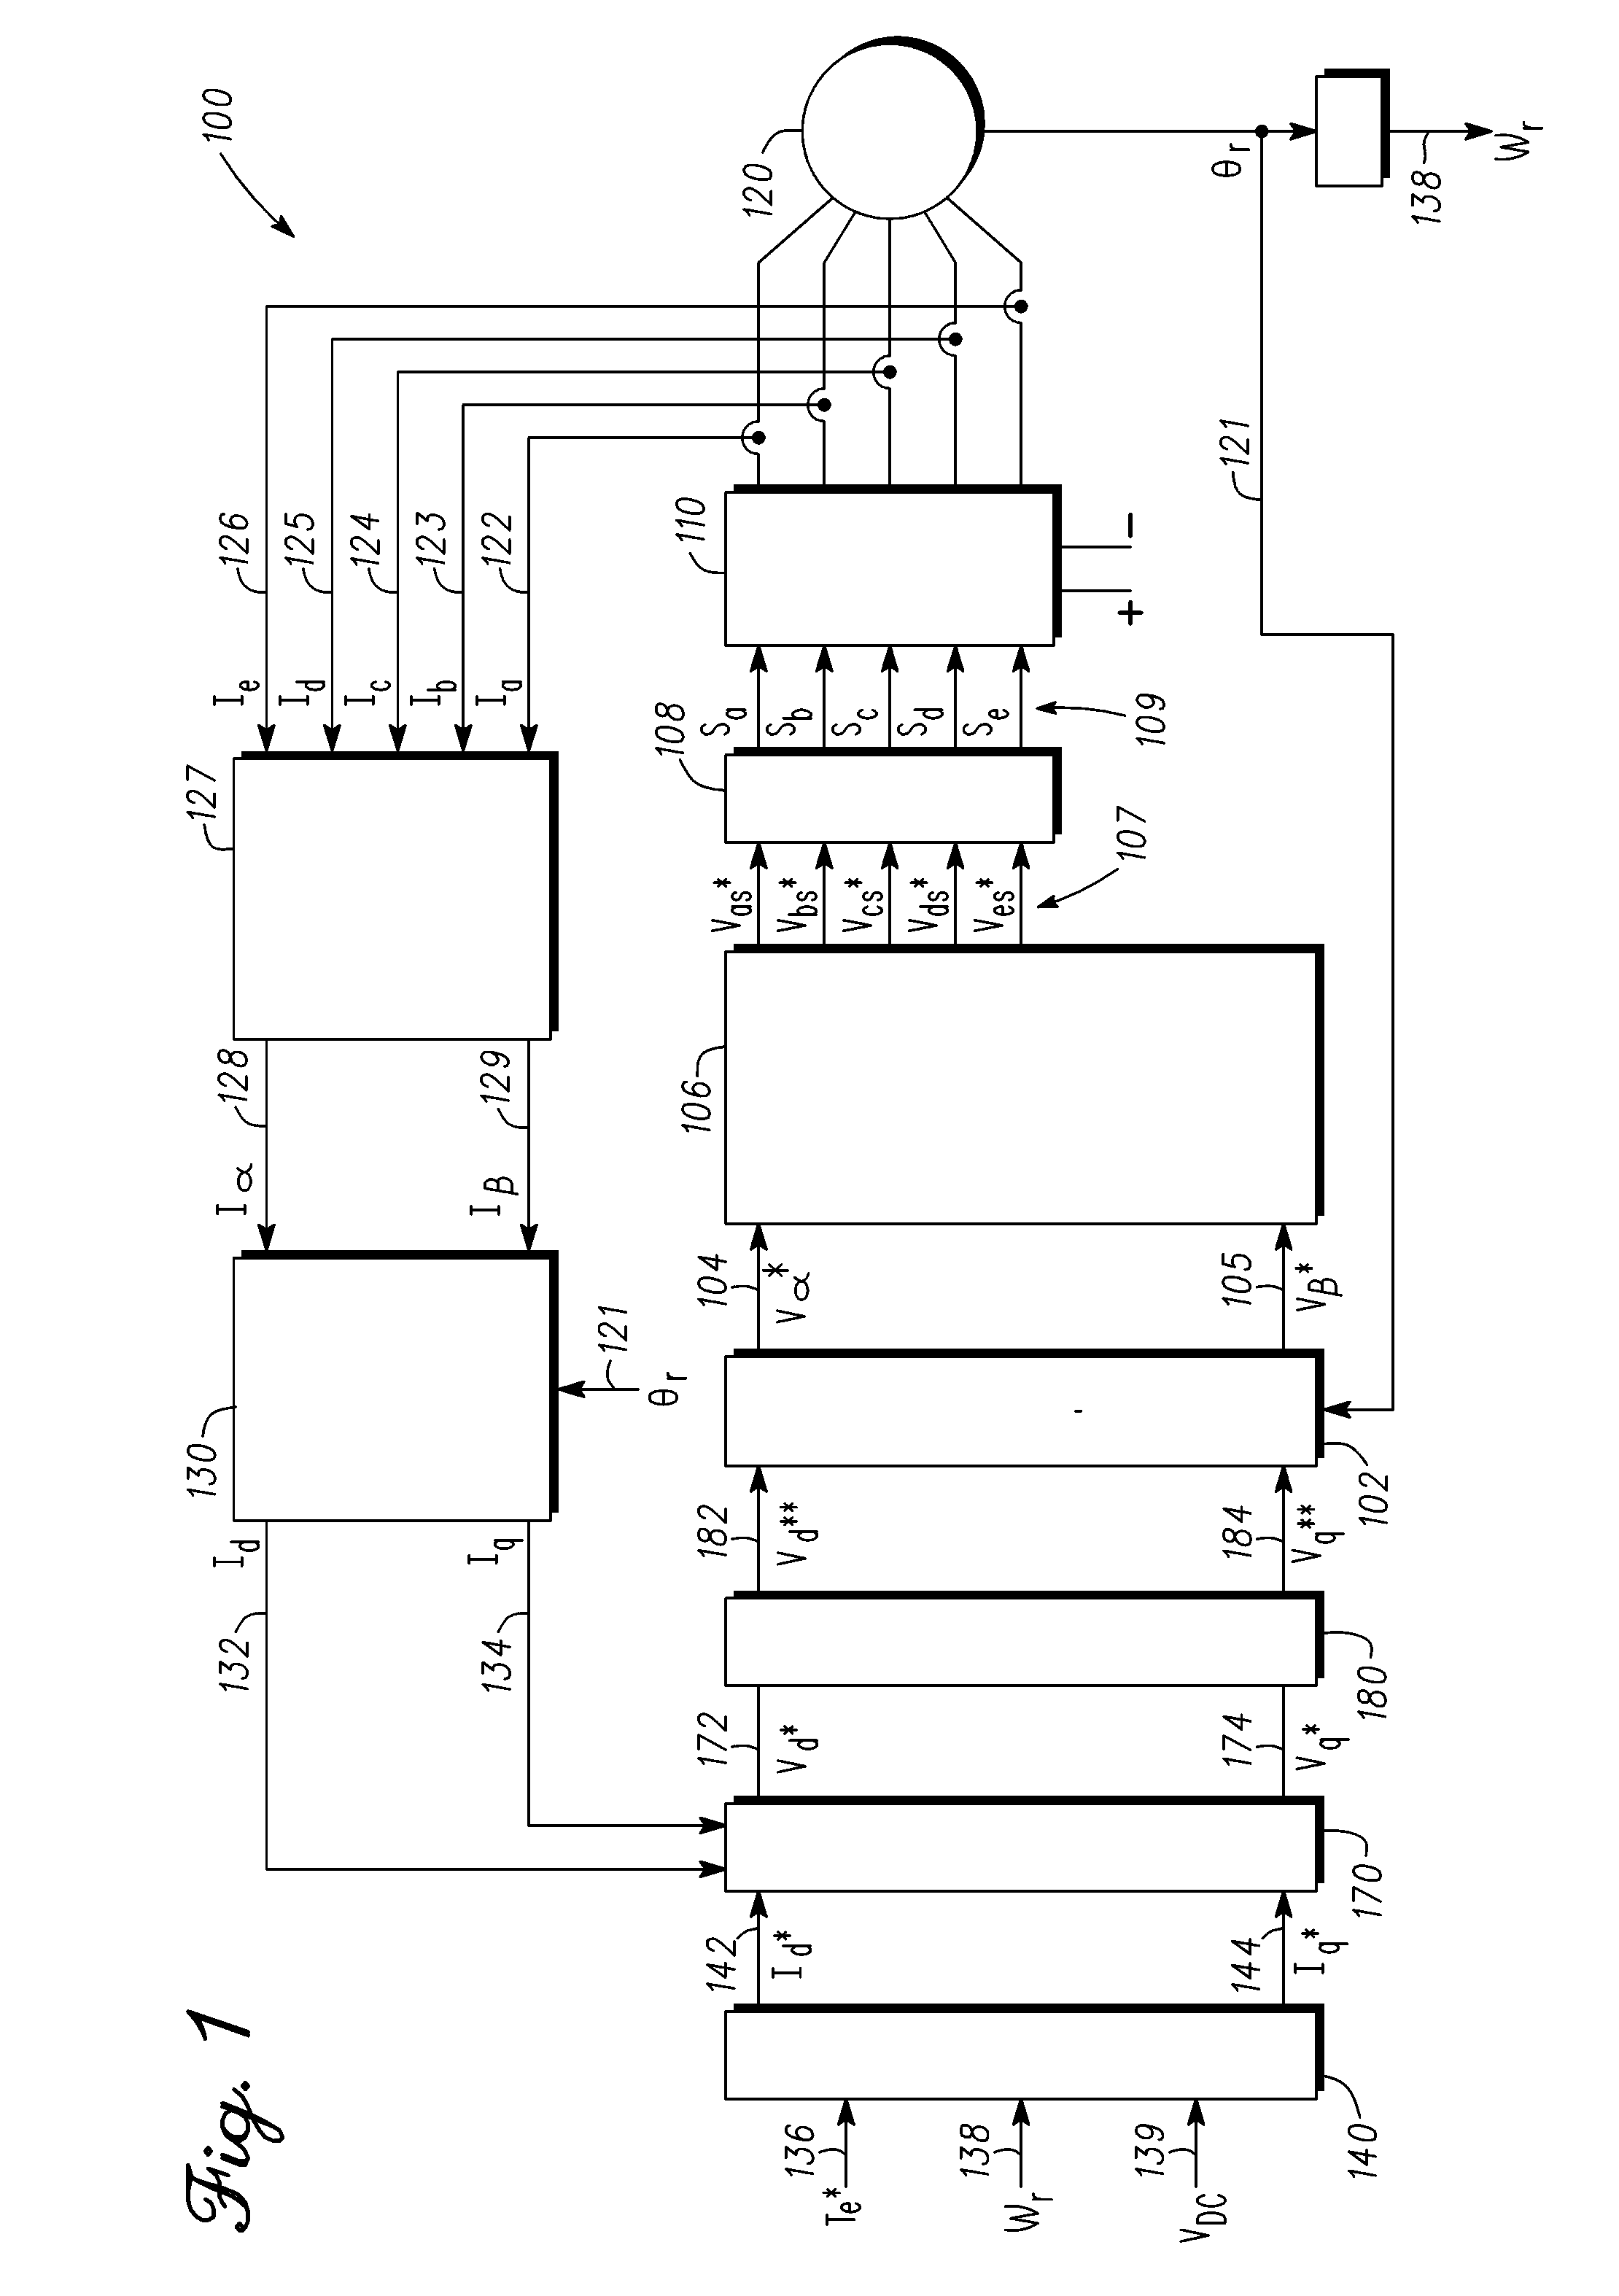 Methods, systems and apparatus for controlling third harmonic voltage when operating a multi-phase machine in an overmodulation region